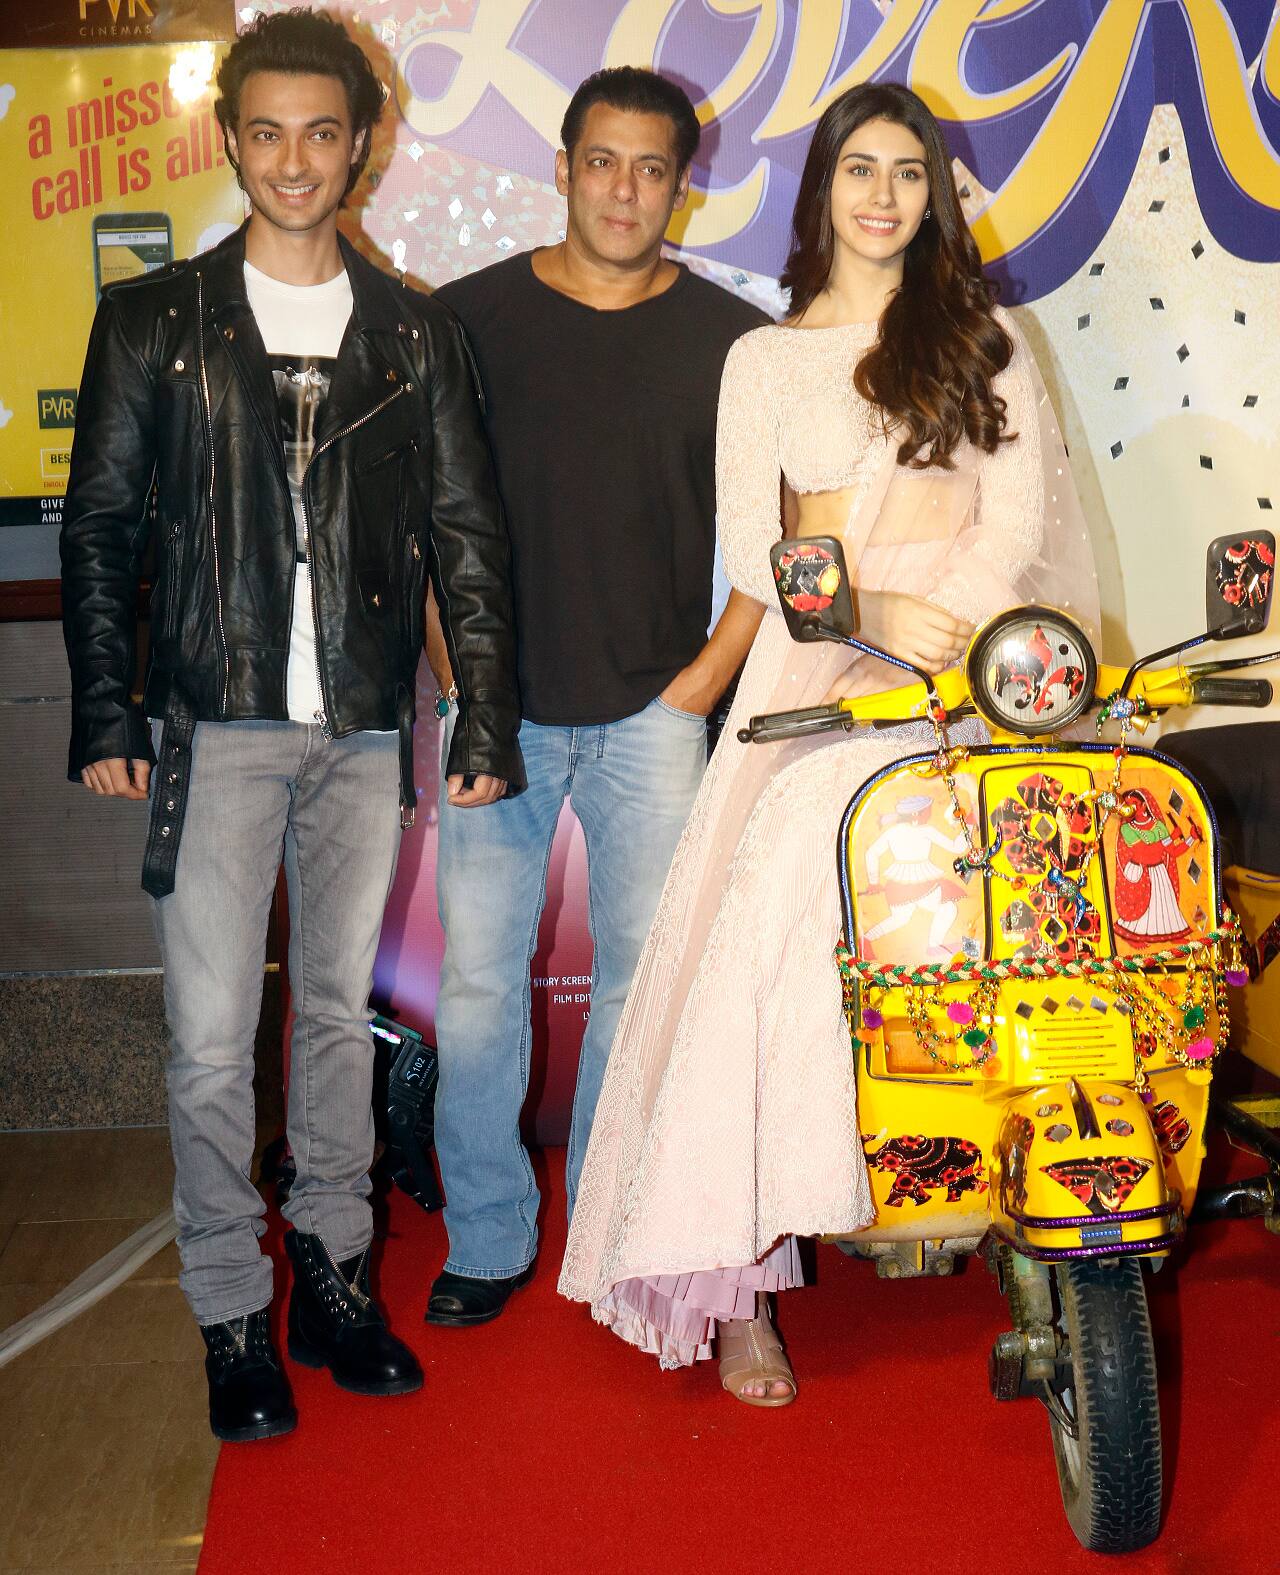 Salman Khan along with the lead cast Aayush Sharma and Warina Hussain, launched the trailer of Loveratri in Mumbai.